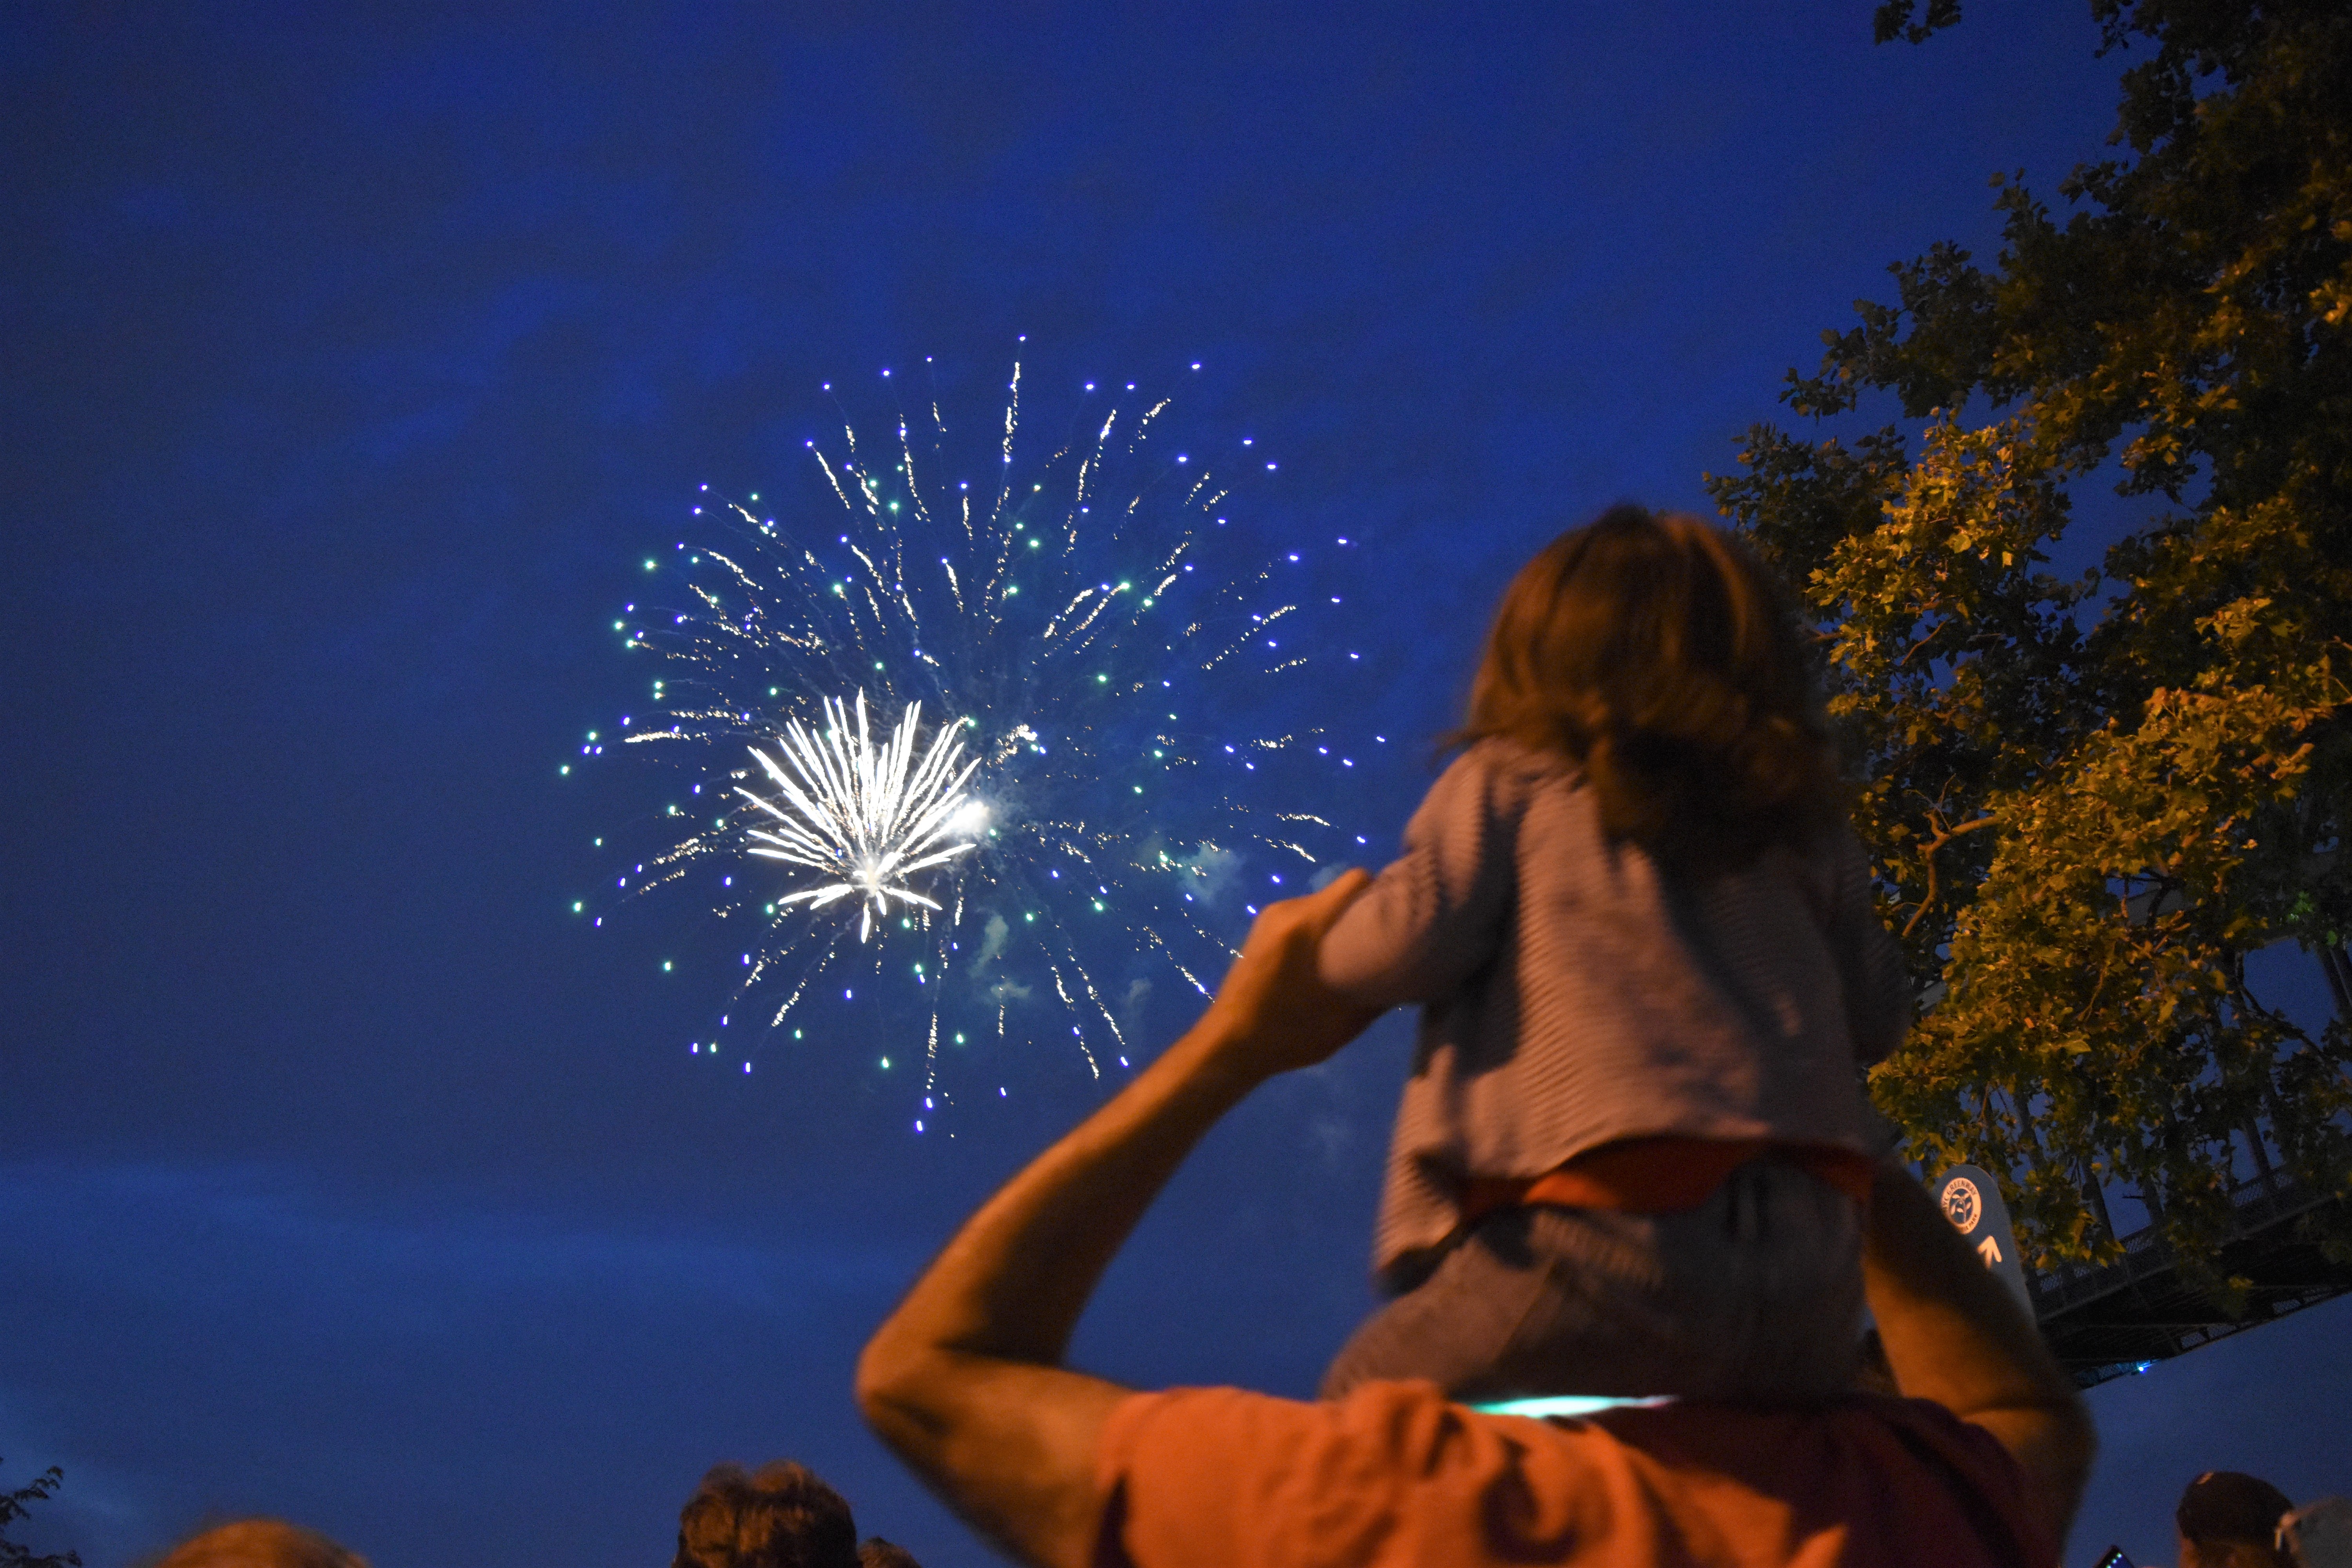 Scenes from the 2017 Astoria Independence Day fireworks show